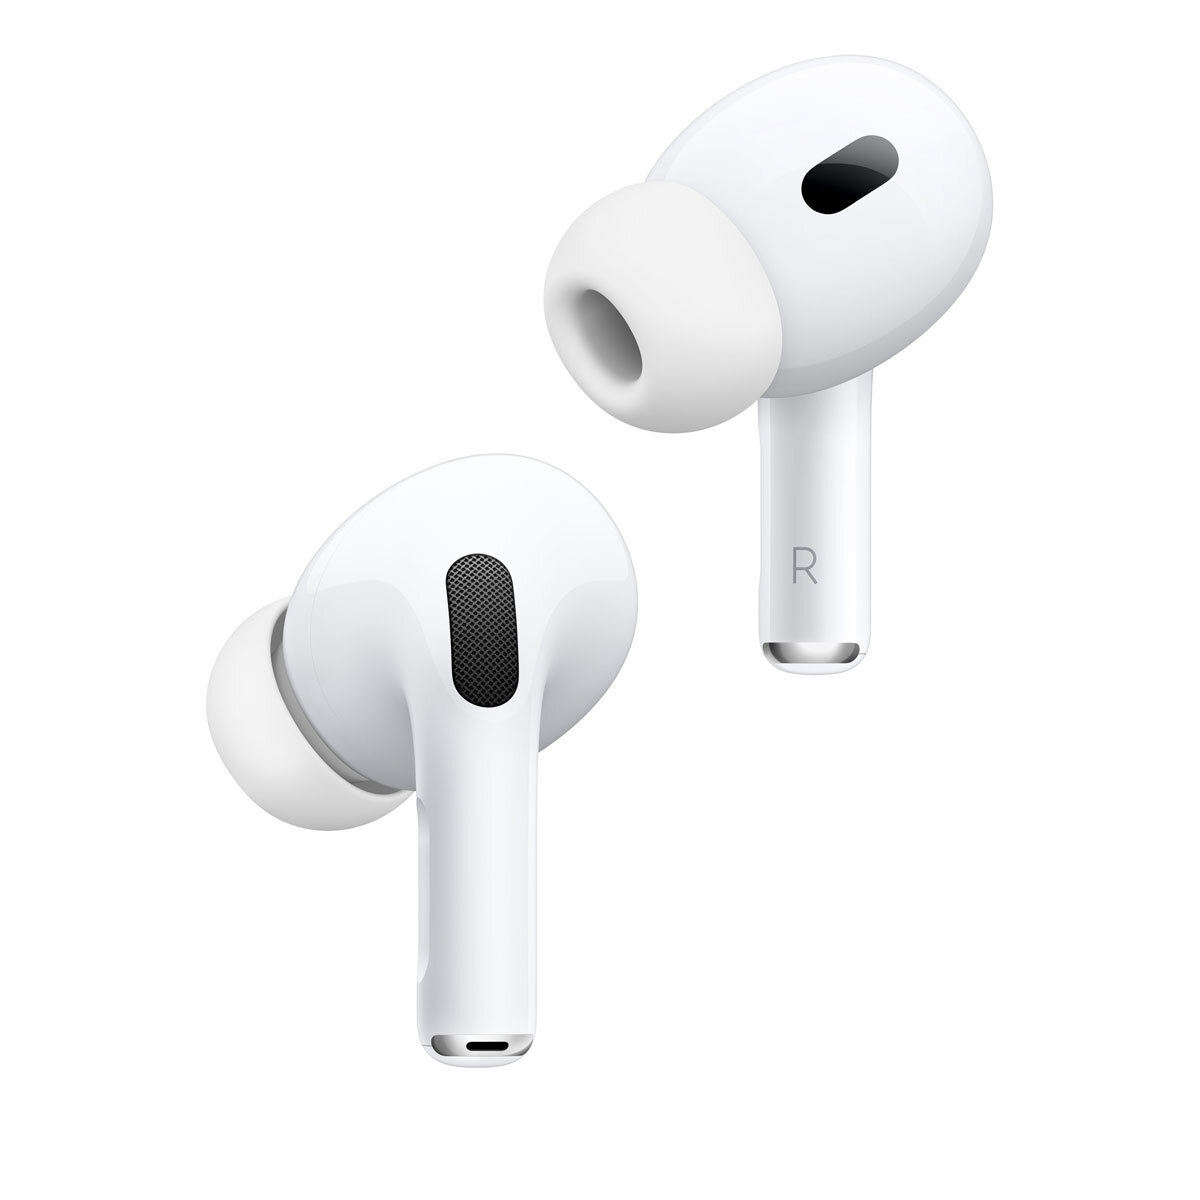 Apple+Wireless+Charging+Case+for+AirPods for sale online